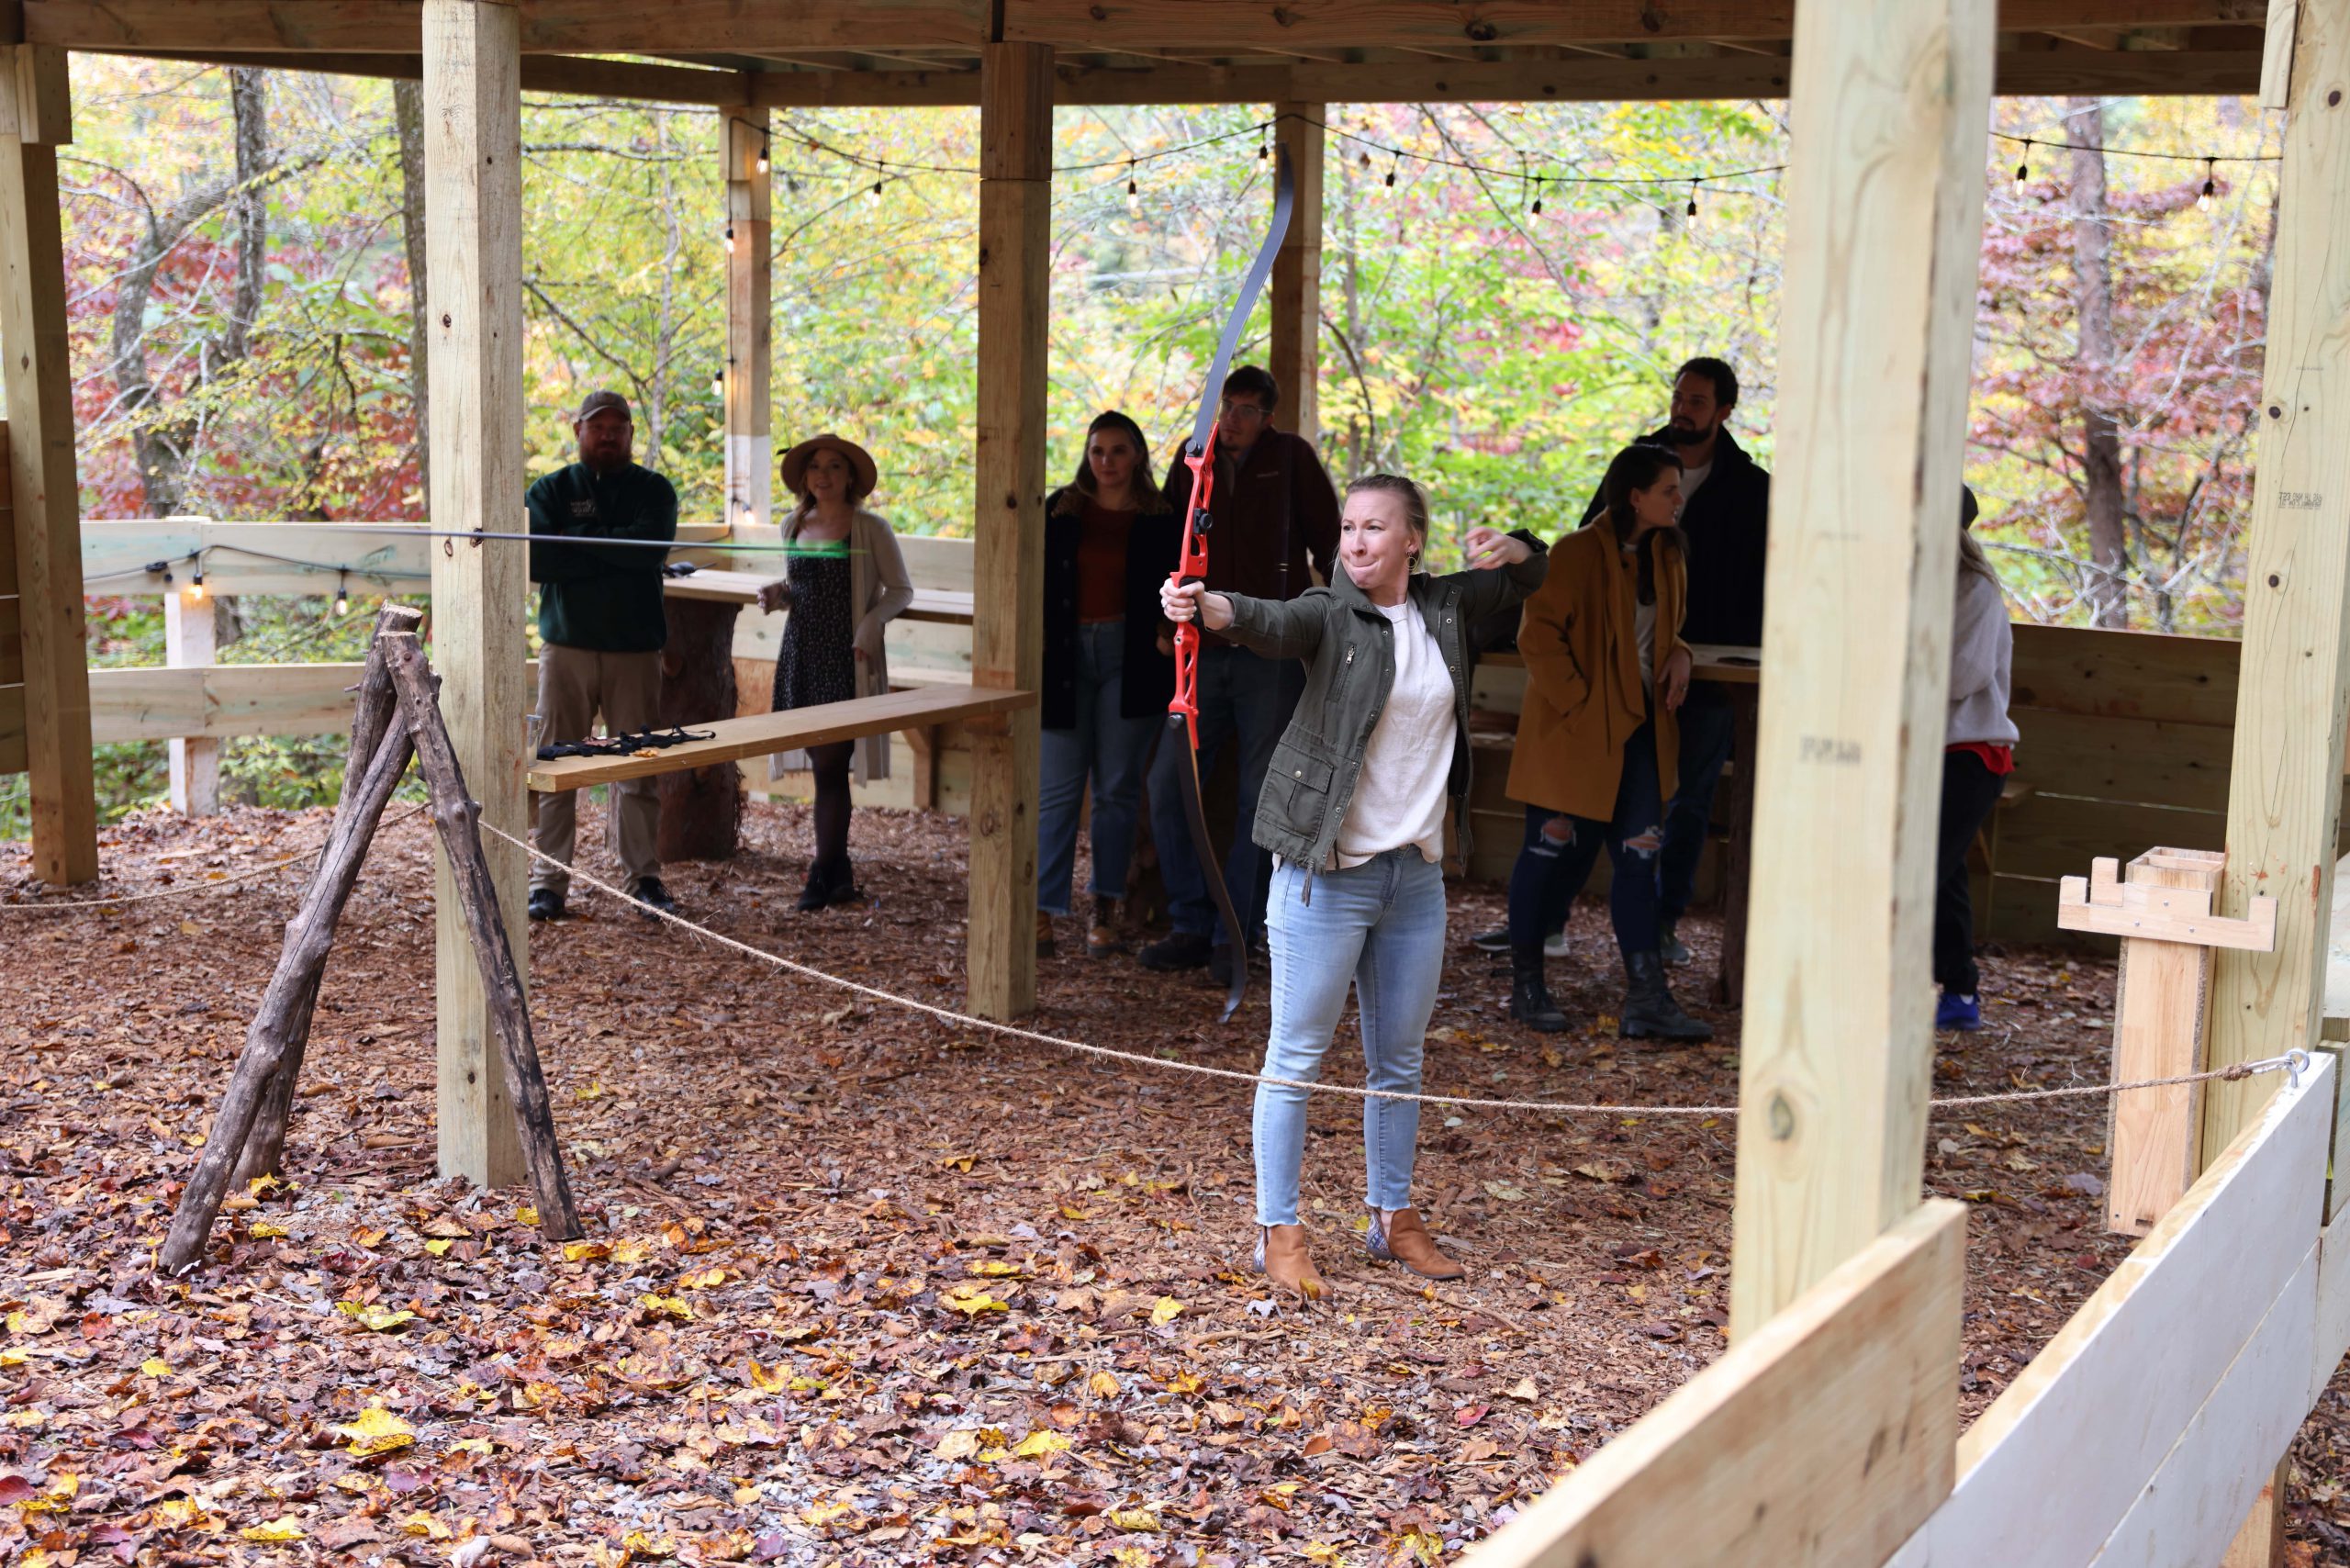 Enjoying archery in the natural beauty of the wooded hillside at Ancient Lore Village